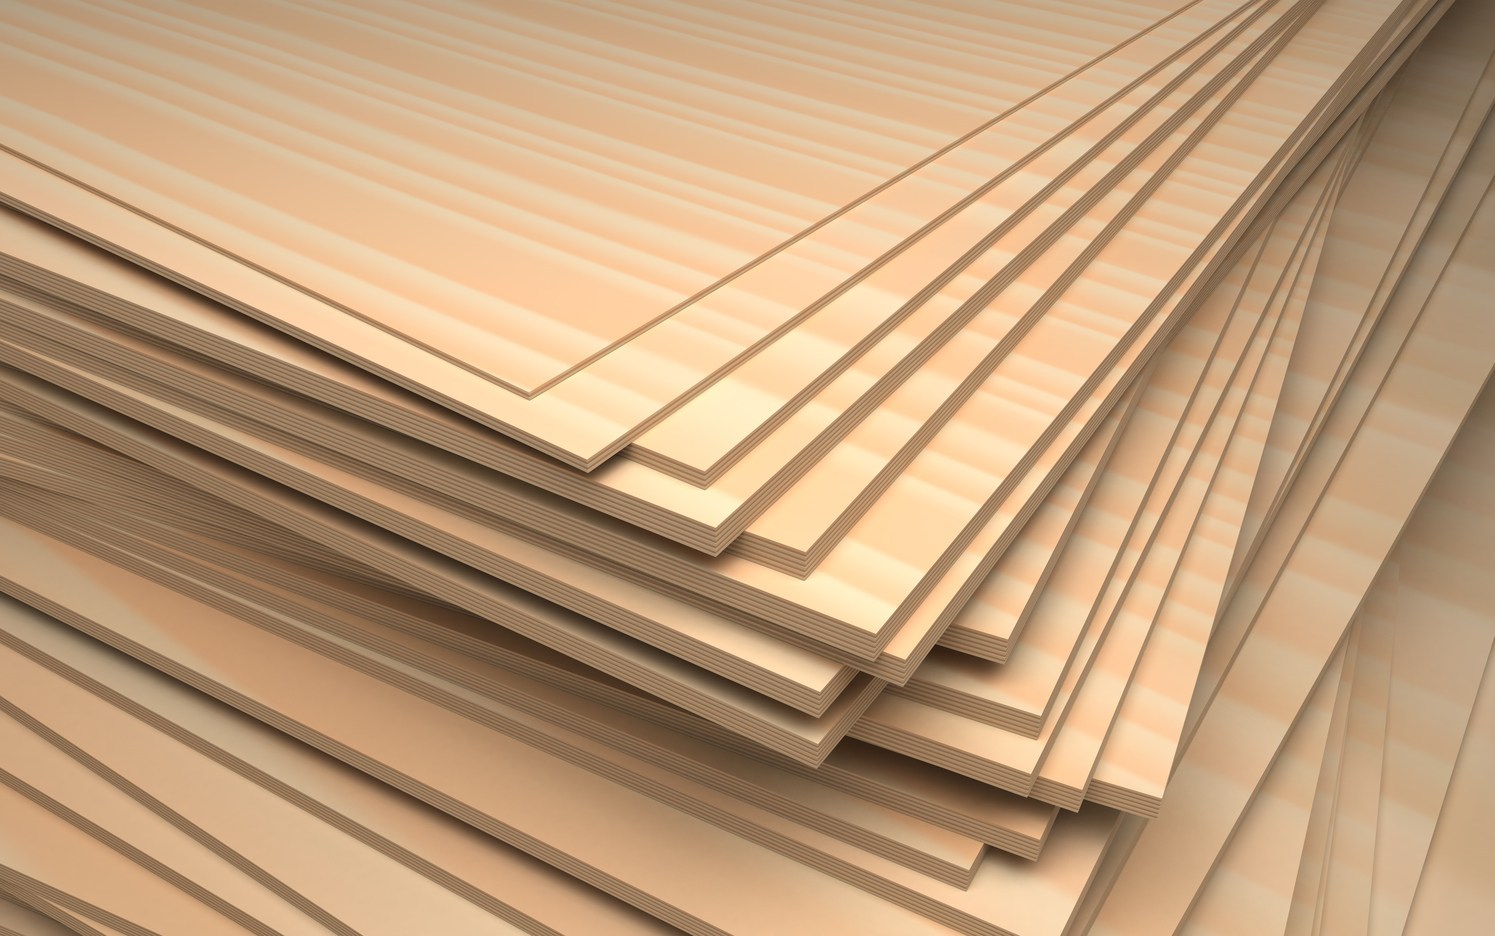 Trending Today Corona impact on Global Lead Lined Plywood Market 2025: Outlook by Key Companies and Growth Forecast 2020| MarShield, Mayco Industries, Envirotect, Ray-Bar